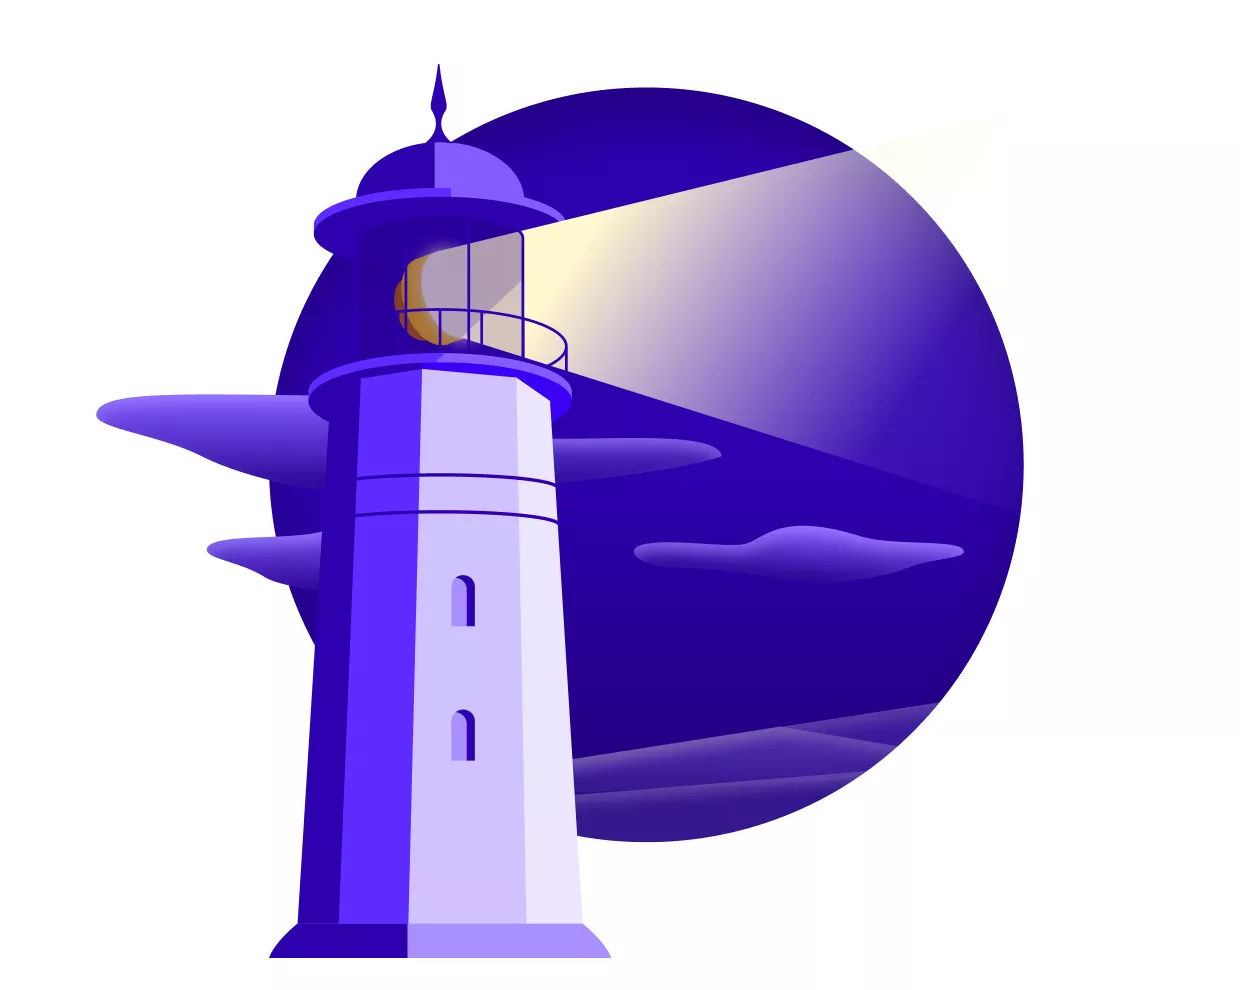 An image showing a stylized purple lighthouse, symbolizing that the purpose of the guide is to help you make your agency management clearer and more efficient.